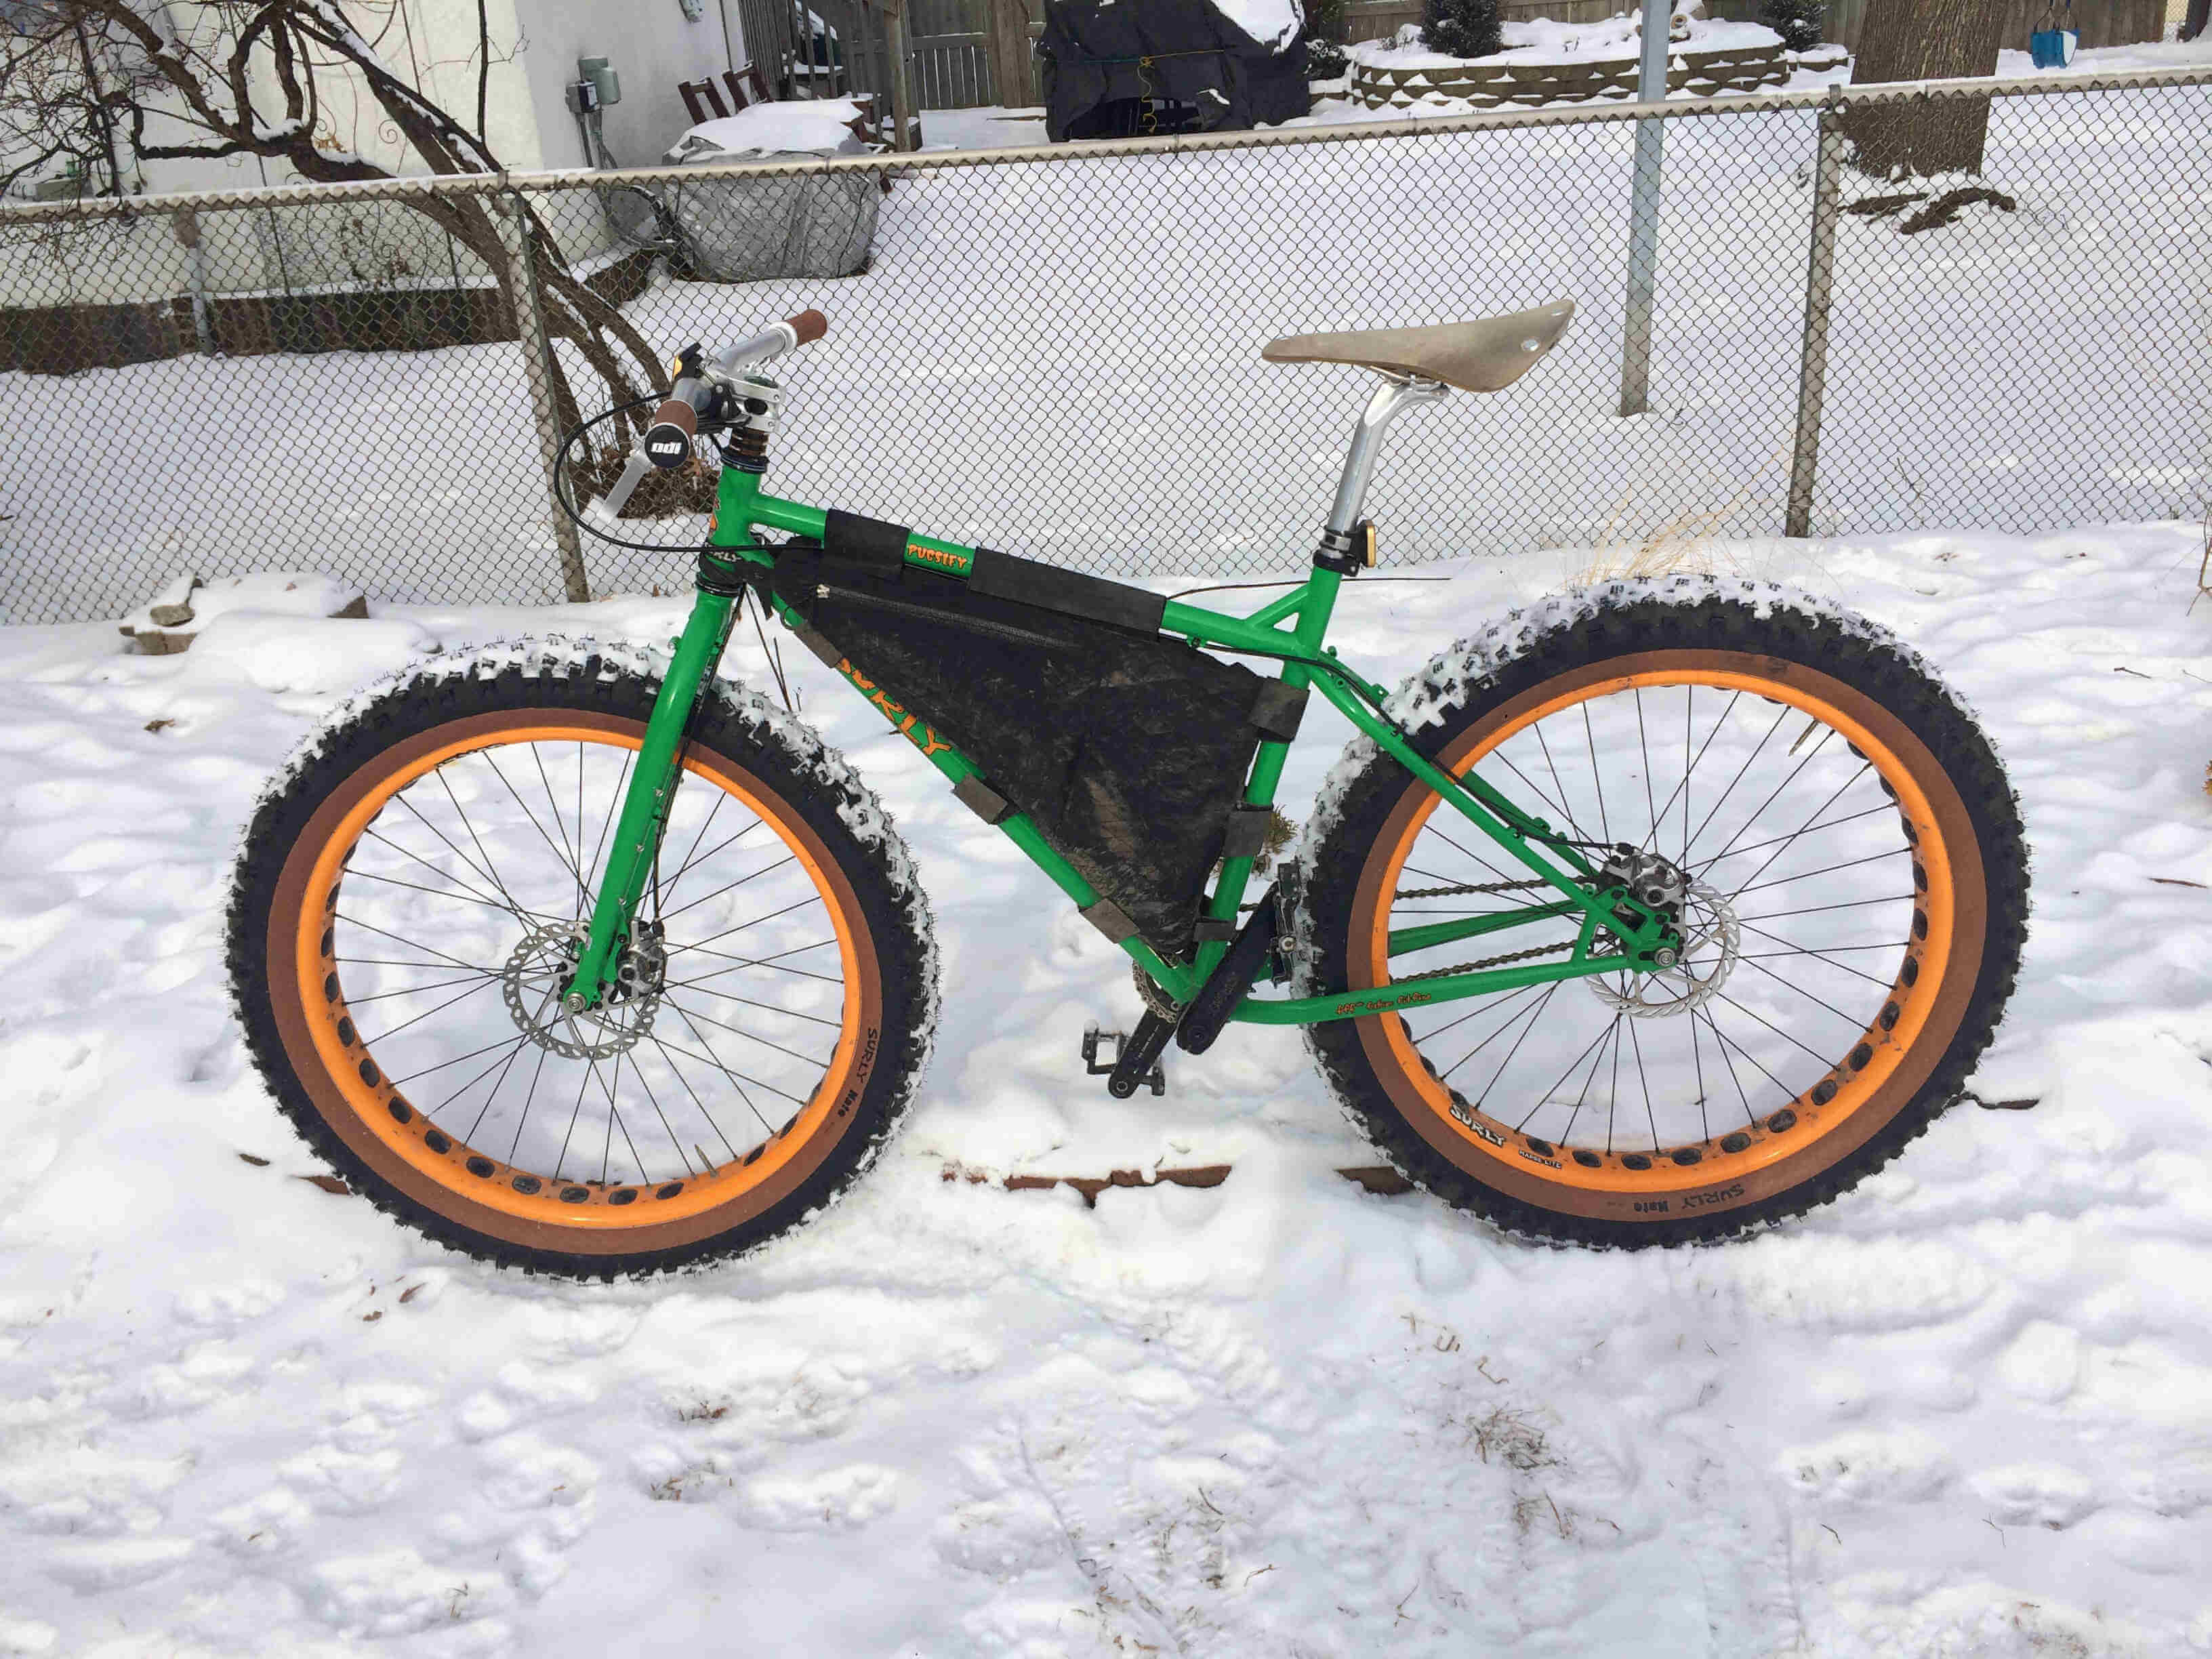 Left side view of a green Surly Pugsley fat bike with offset forks, parked in snow with a chain link fence in background